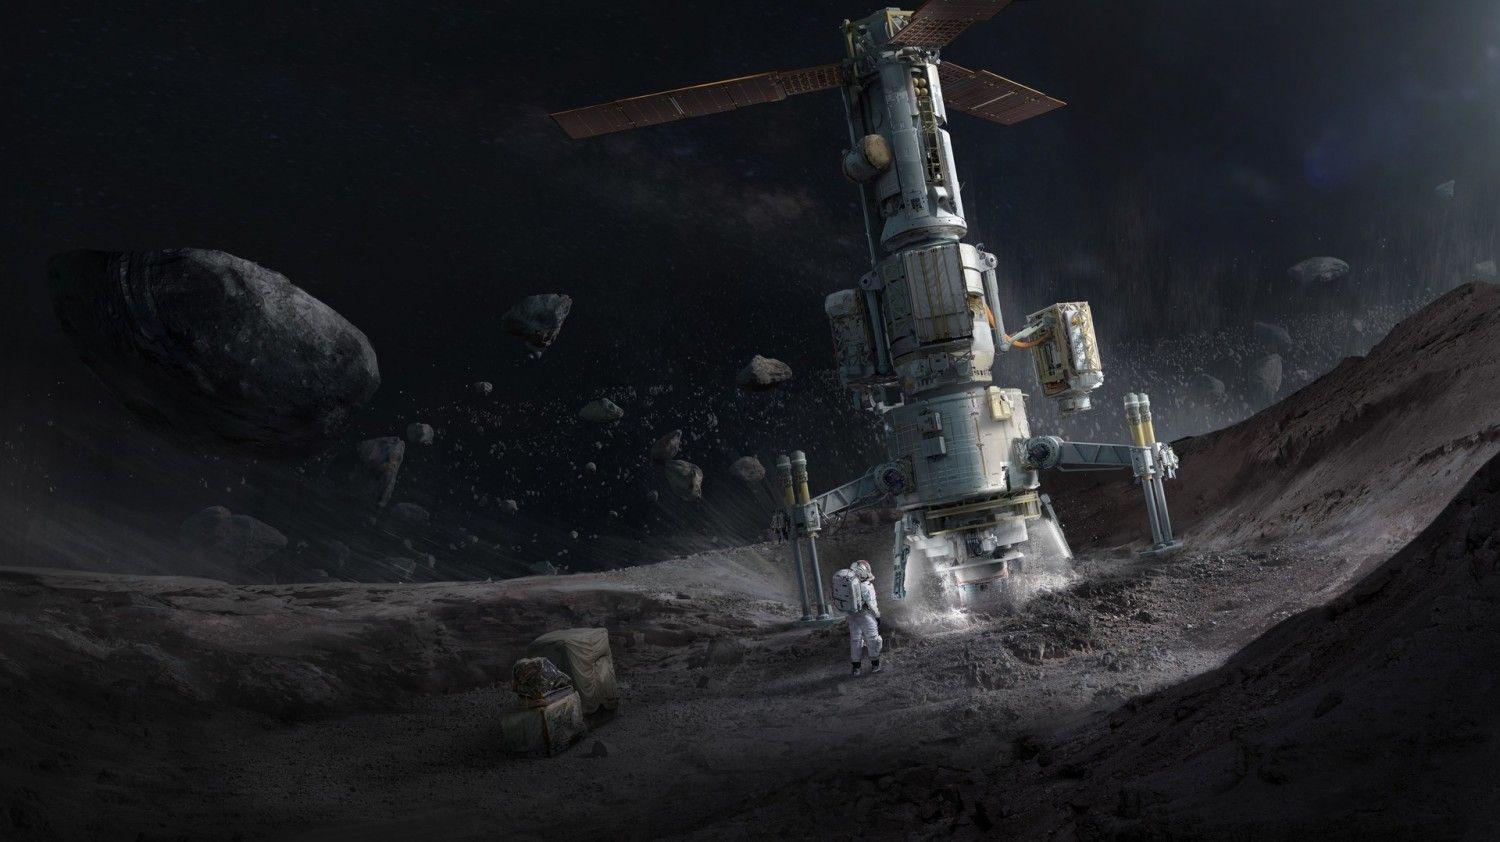 Download 1500x842 Planet Surface, Astronaut, Asteroid, Sci Fi